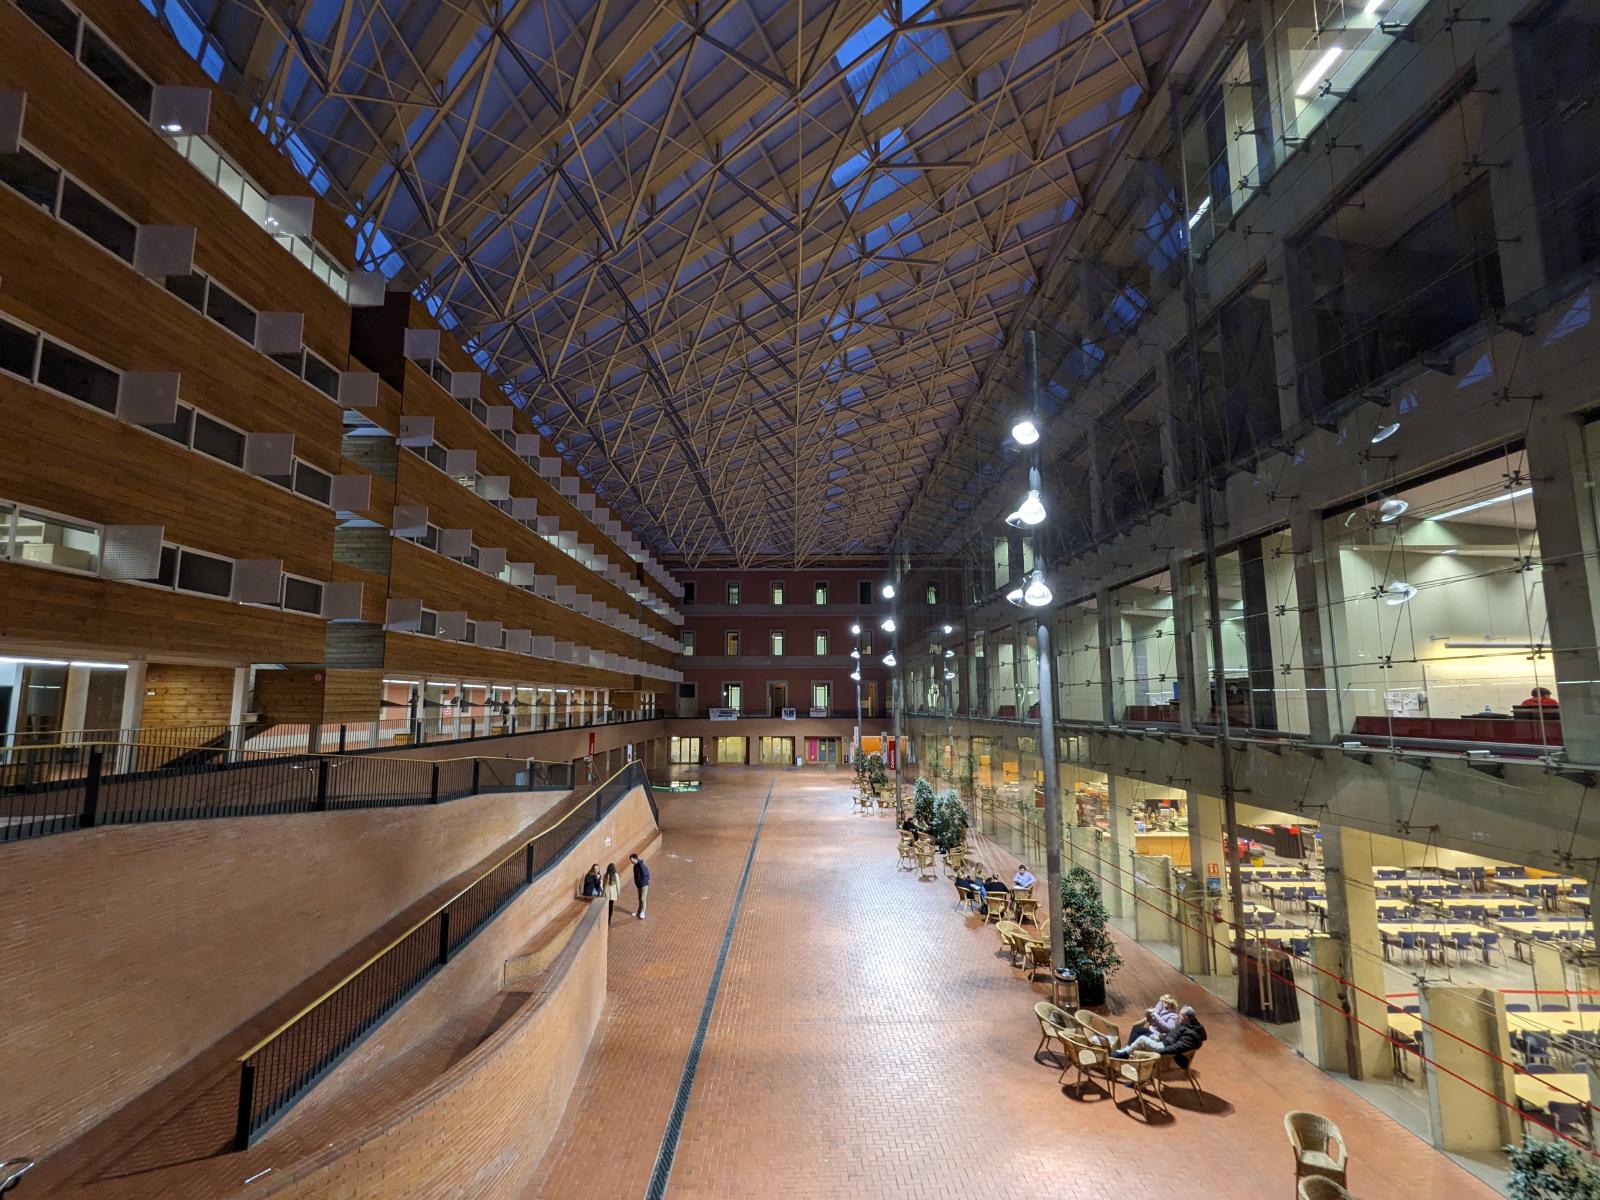 Two buildings with a inner floor that has a large roof. The left building has a wooden design, the right one has a large glass front in which you can see some lecture halls.